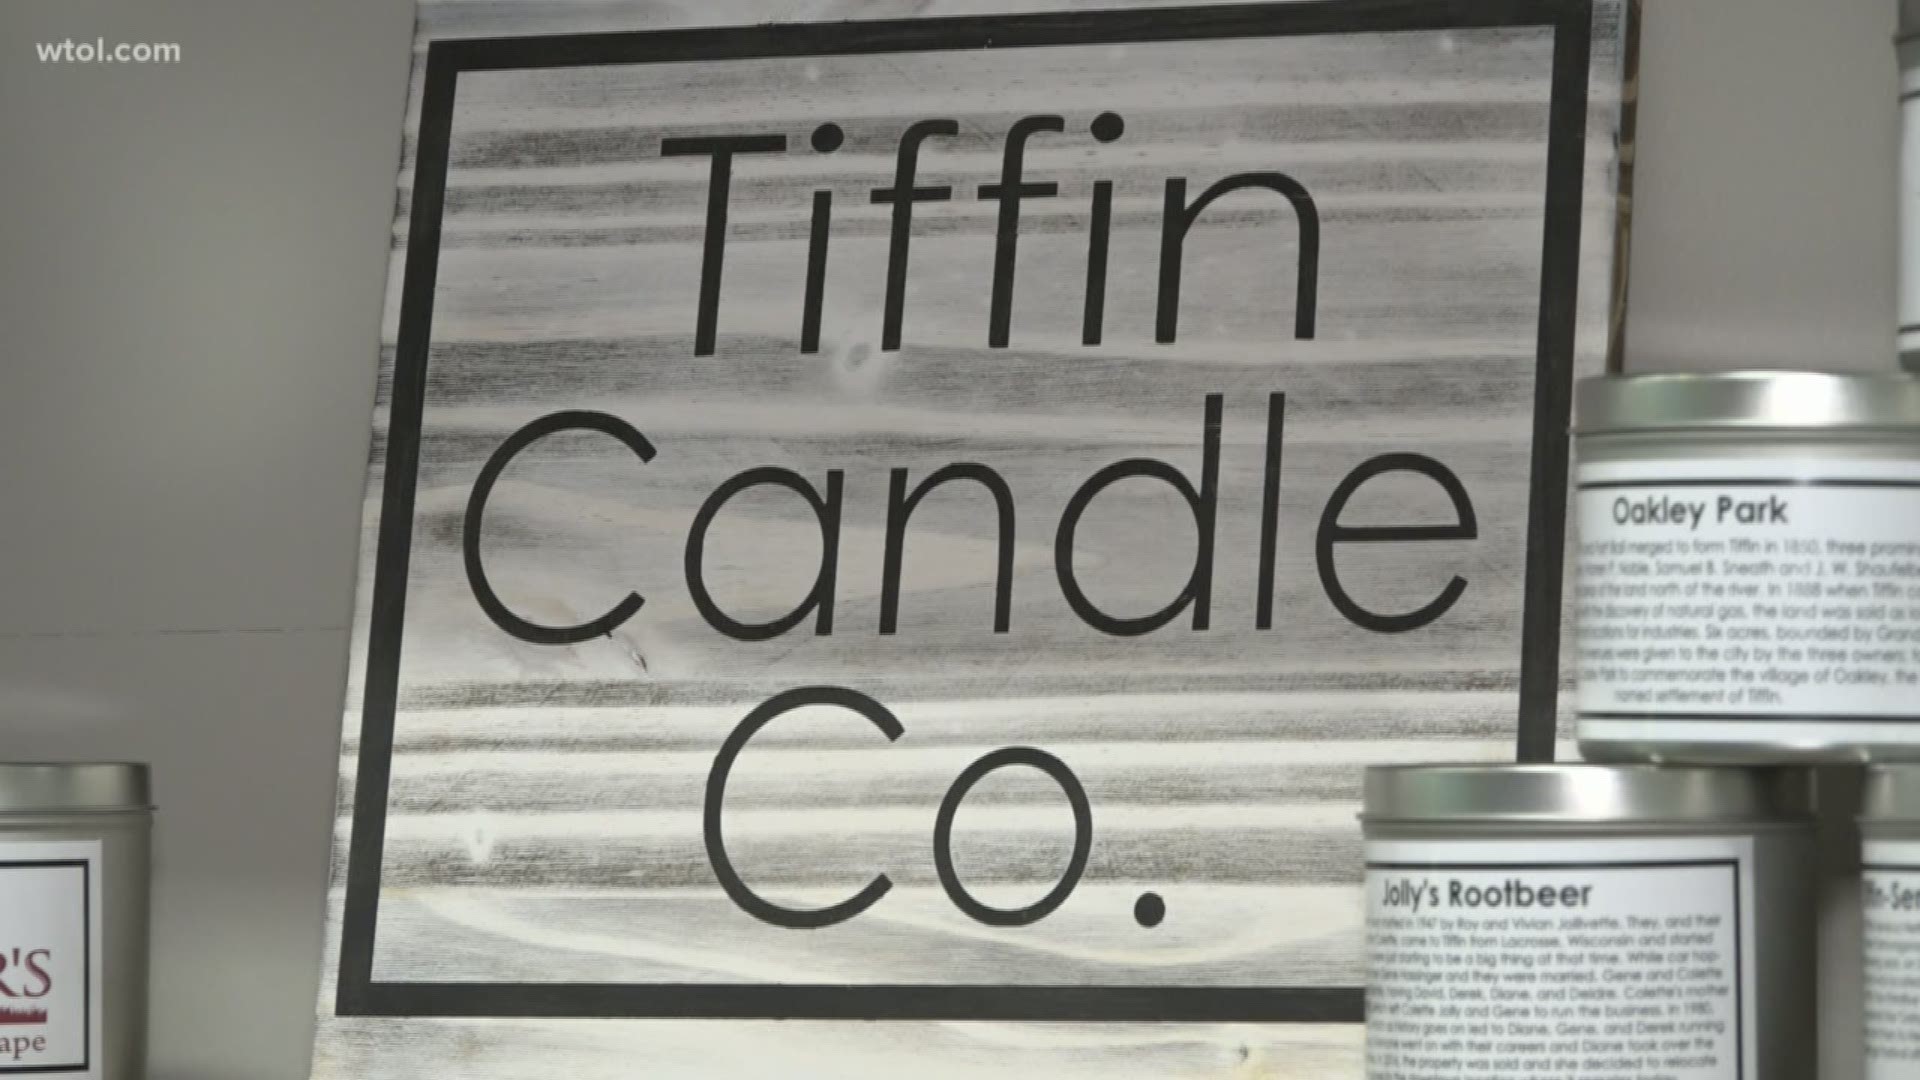 The candle company has named its scented candles after prominent landmarks and locations in four communities.